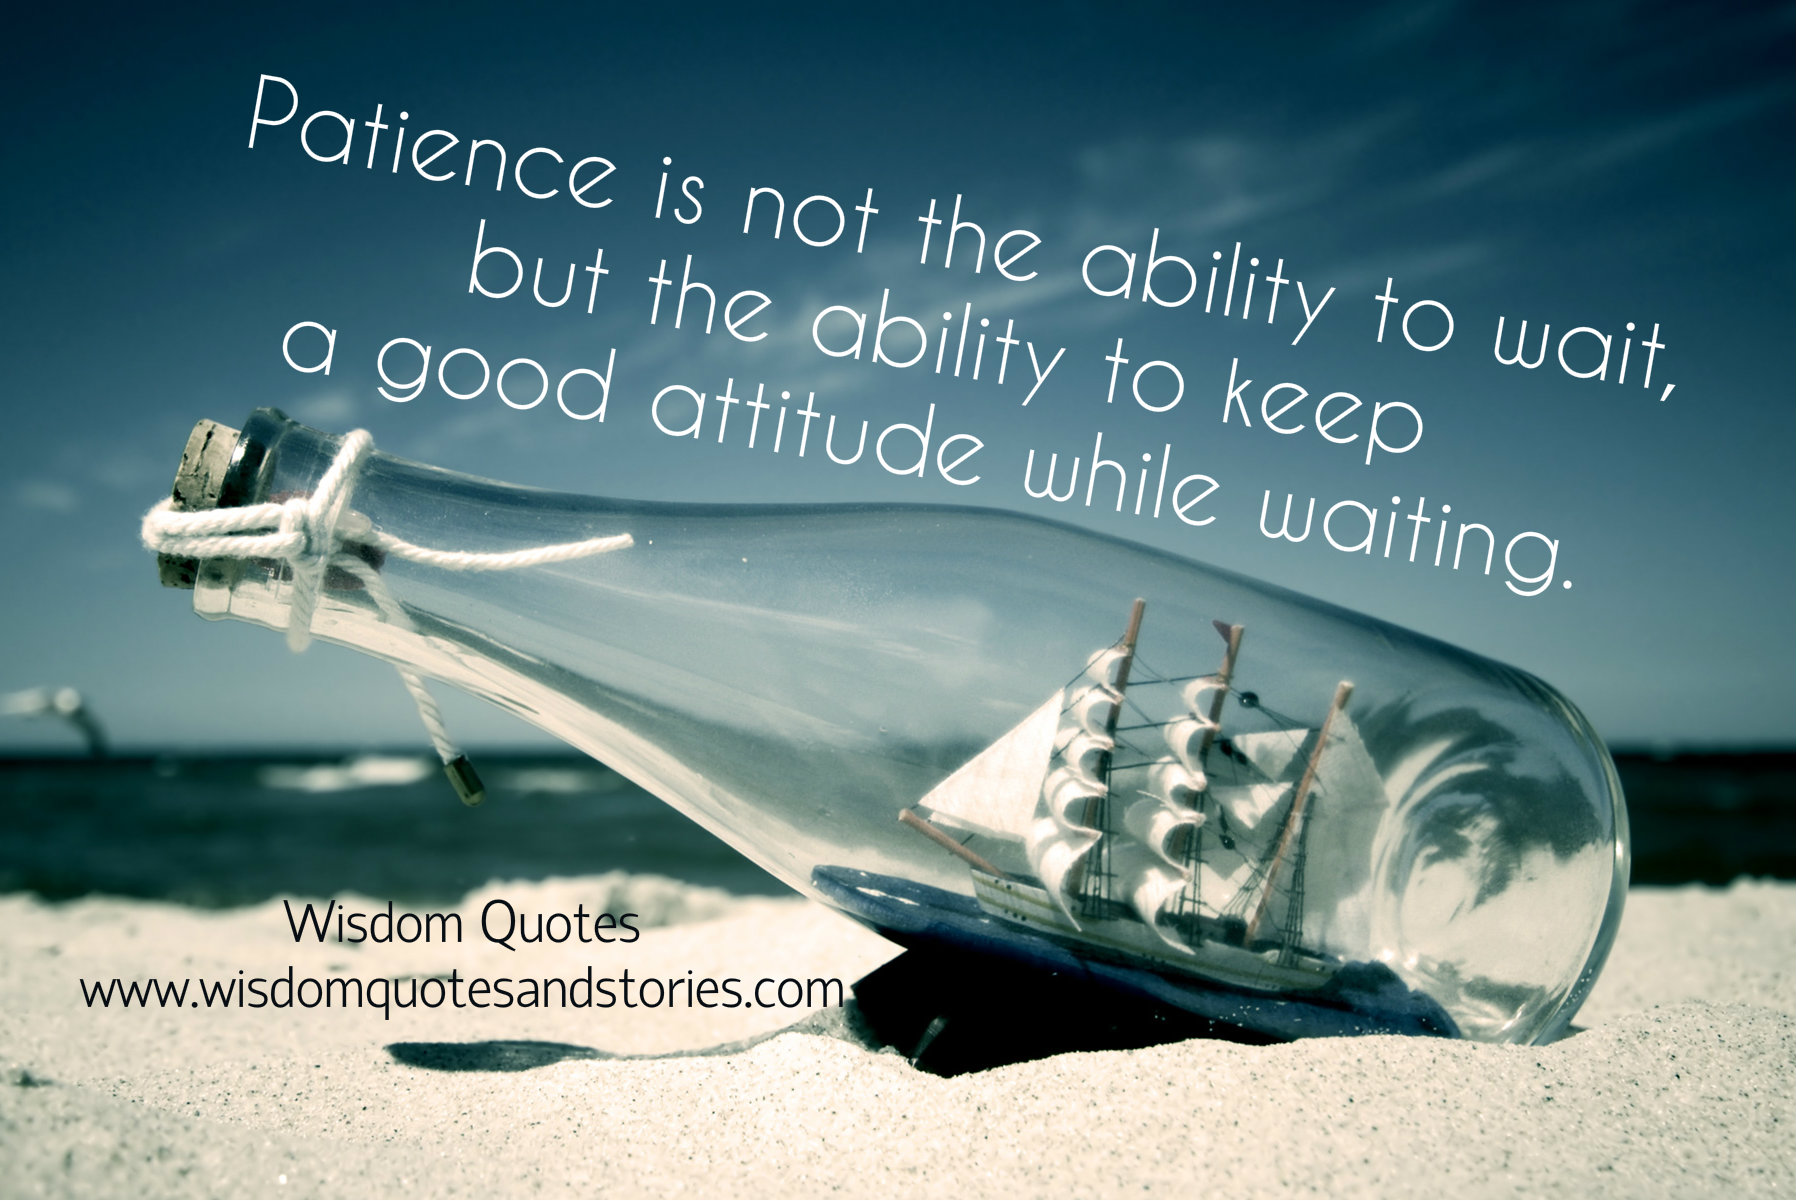 To Keep A Good Attitude While Waiting Wisdom Quotes And Stories